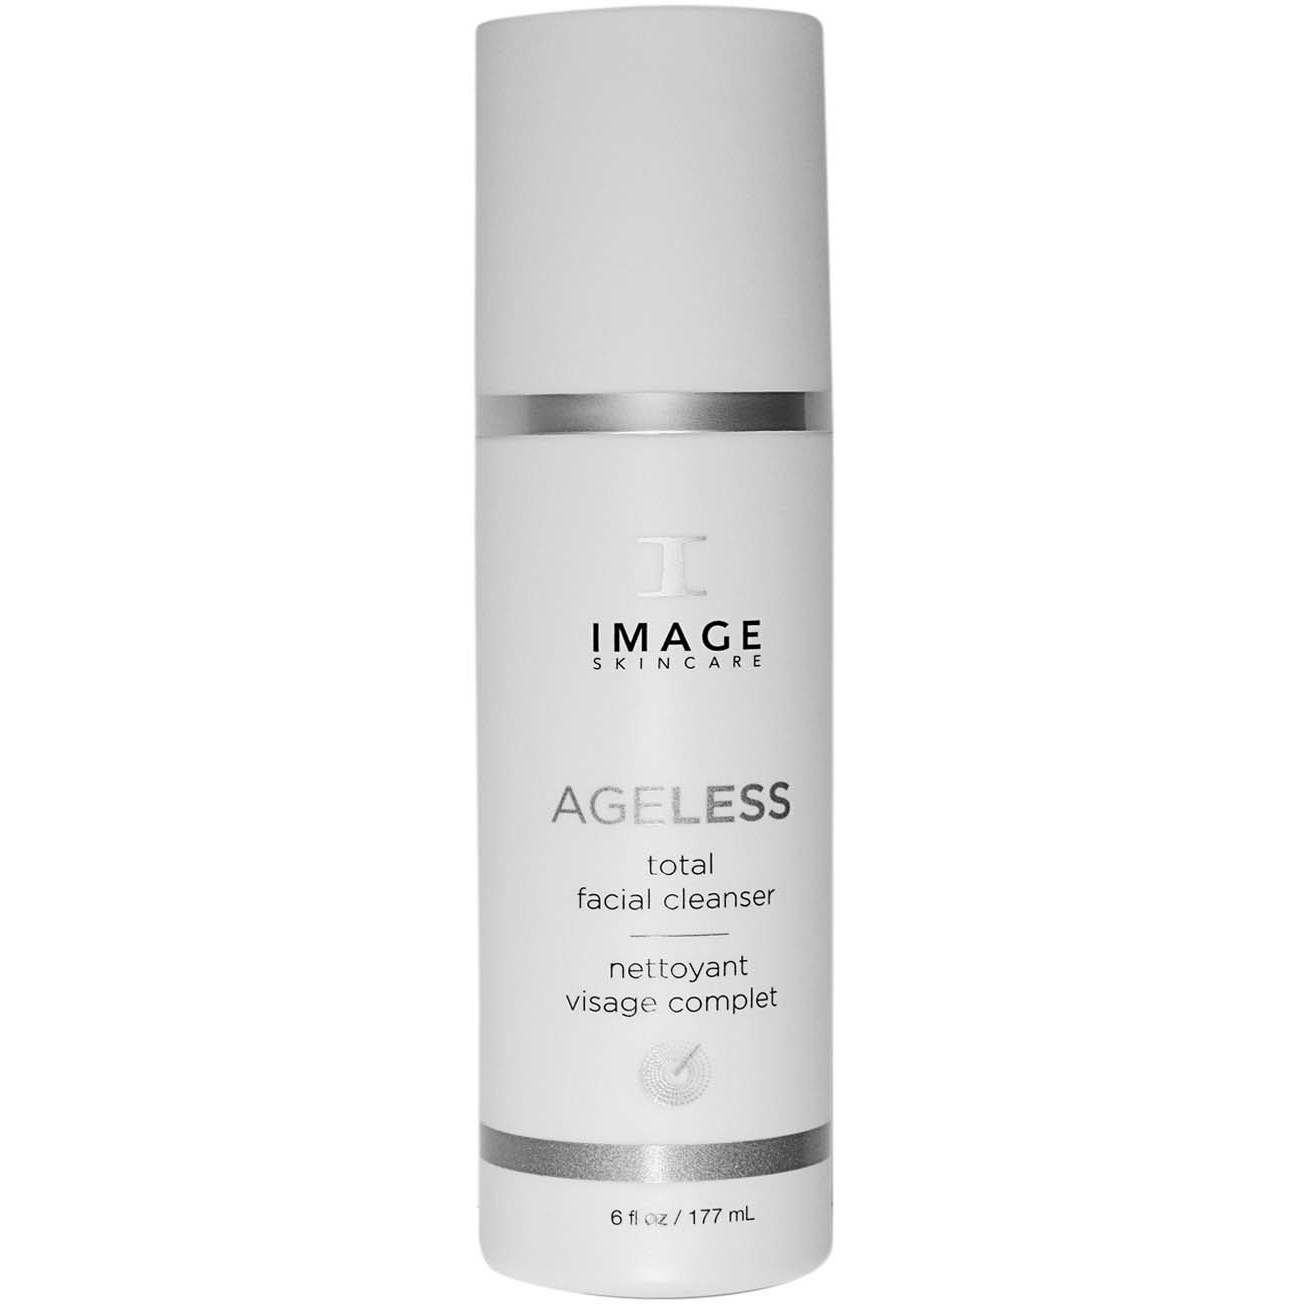 IMAGE Skincare Ageless Total Facial Cleanser 177 ml